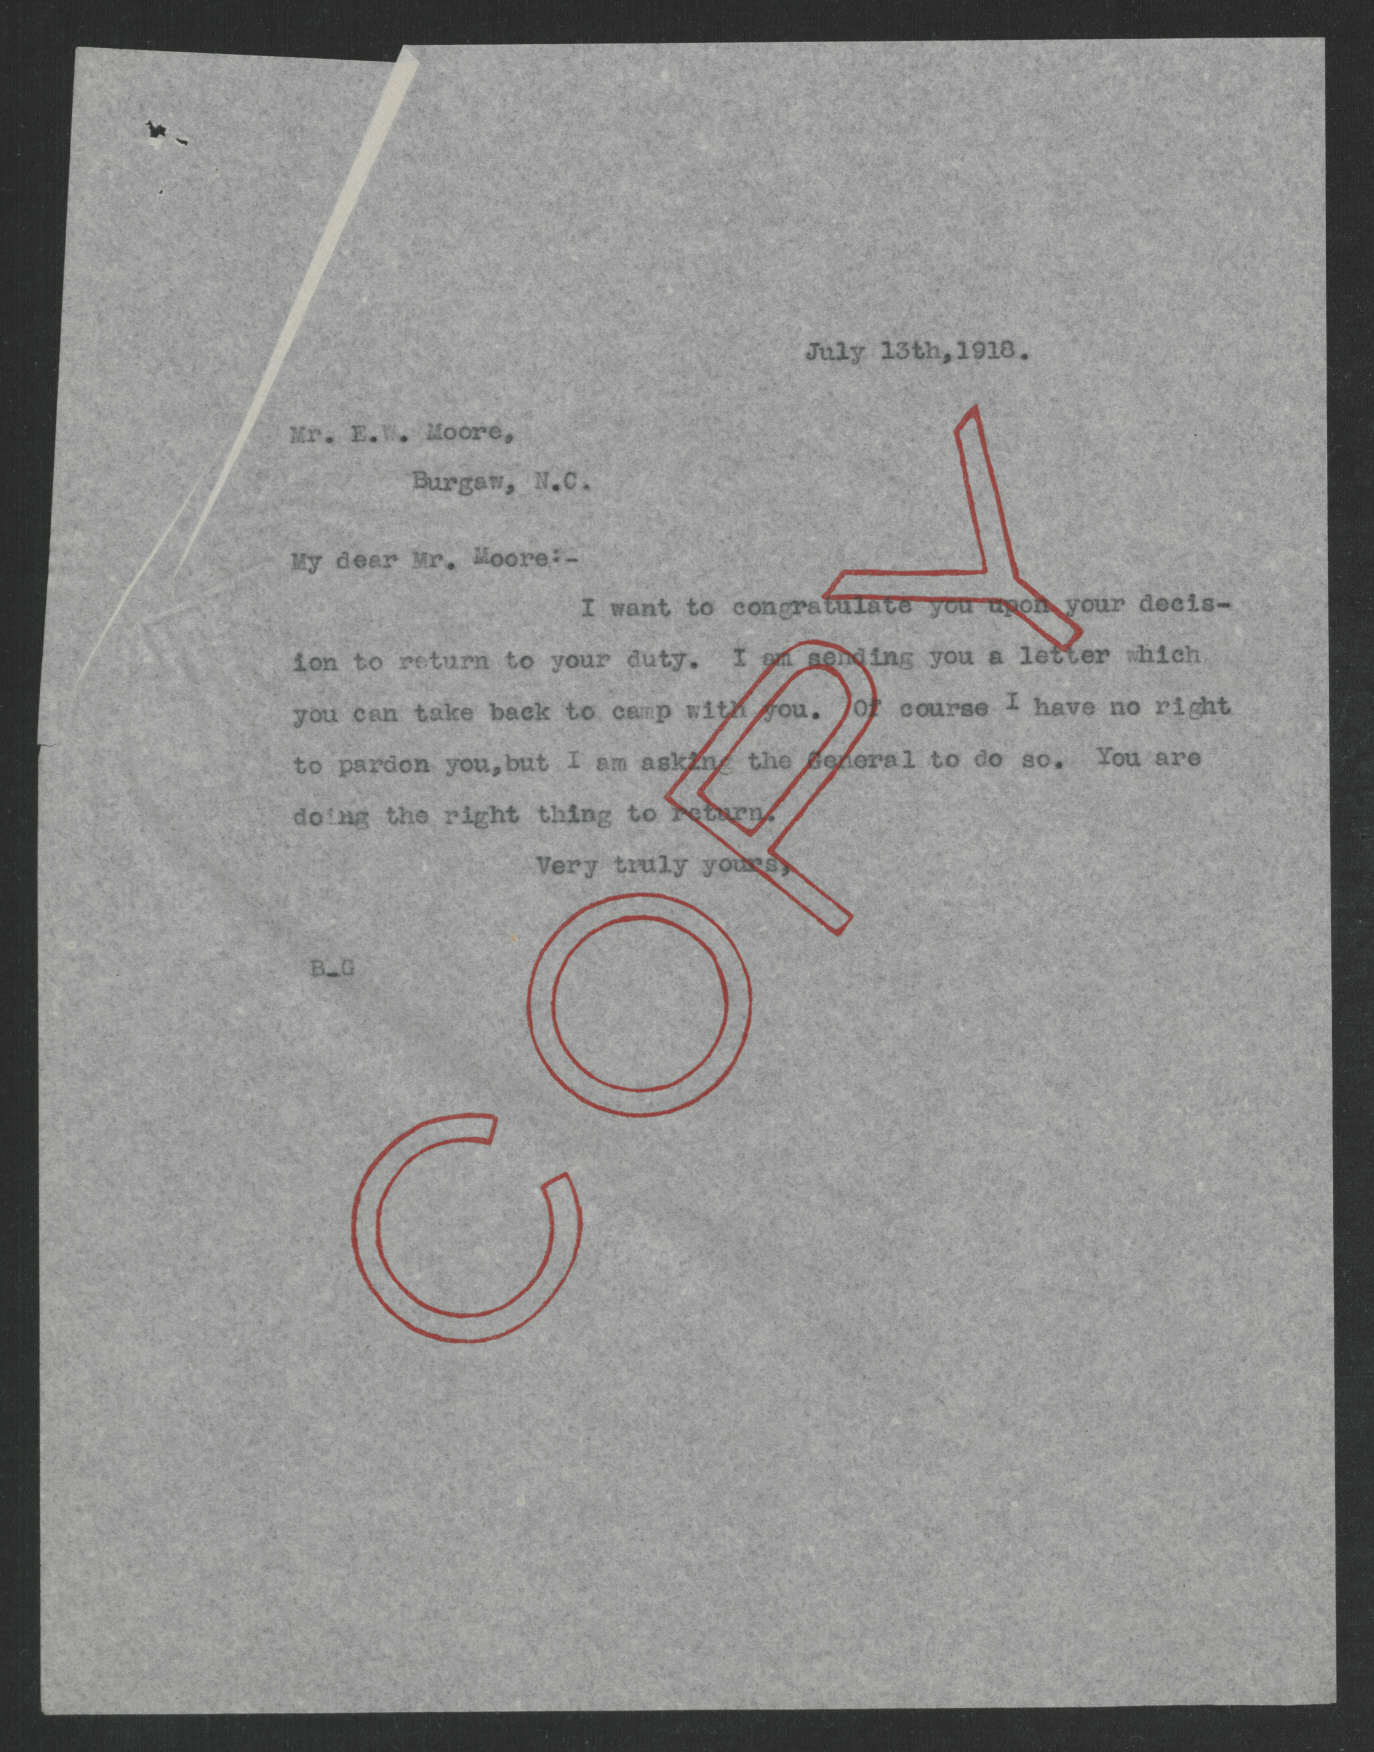 Letter from Thomas W. Bickett to Edgar W. Moore, July 13, 1918